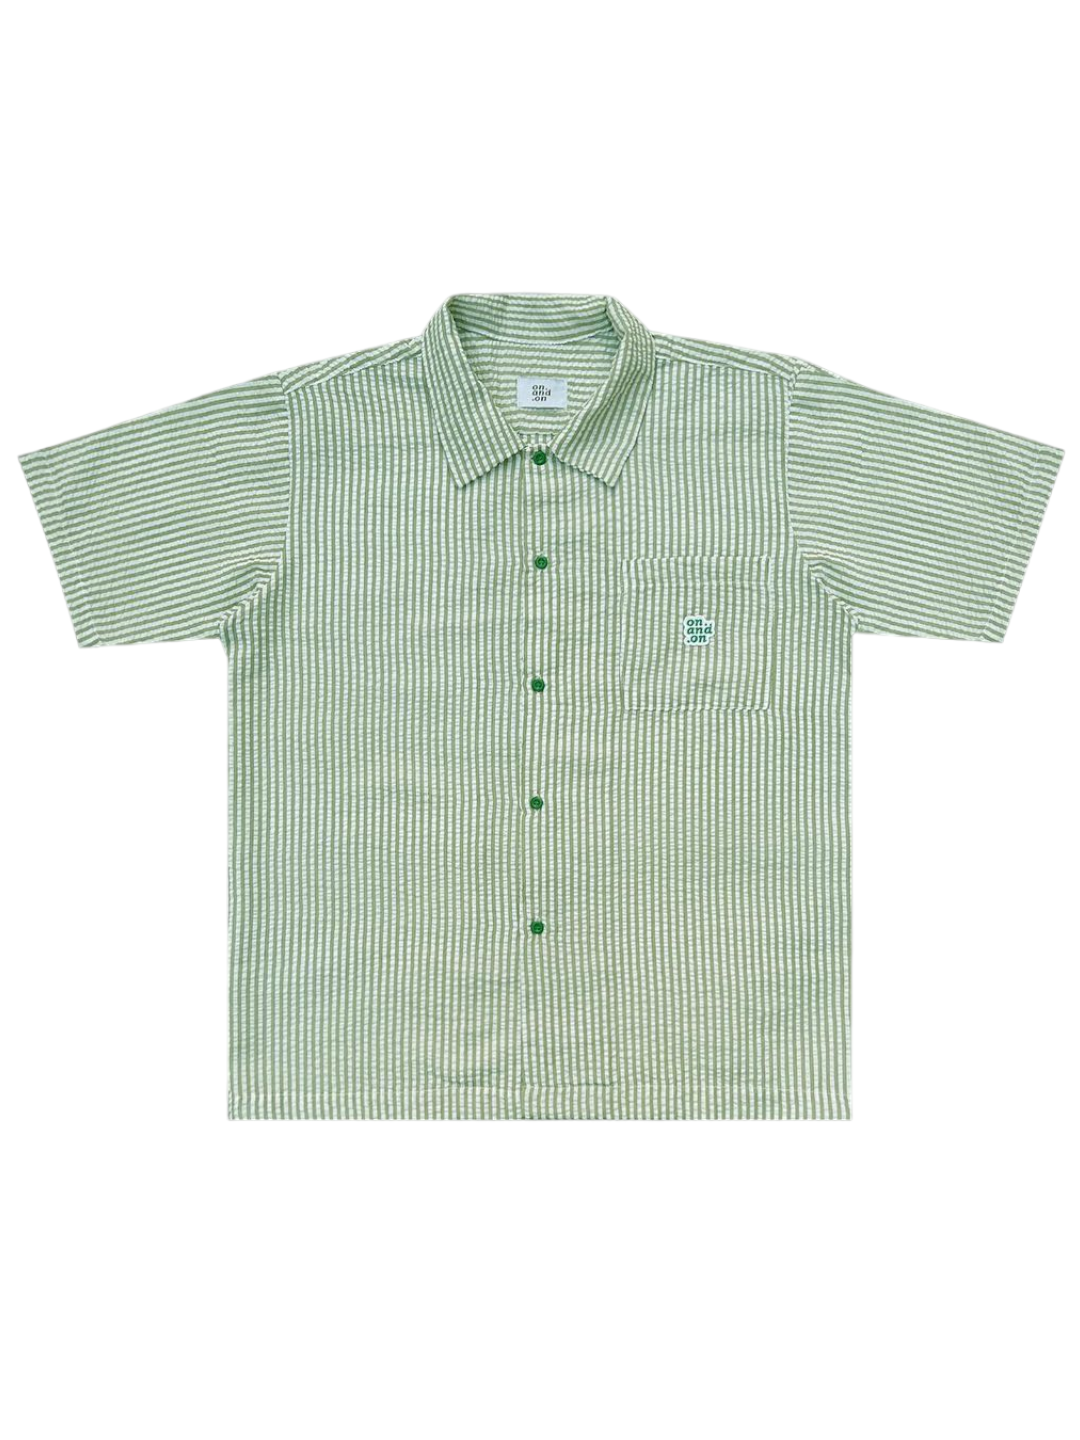 On.and.on.bkk Dazzle Shirt (Green)